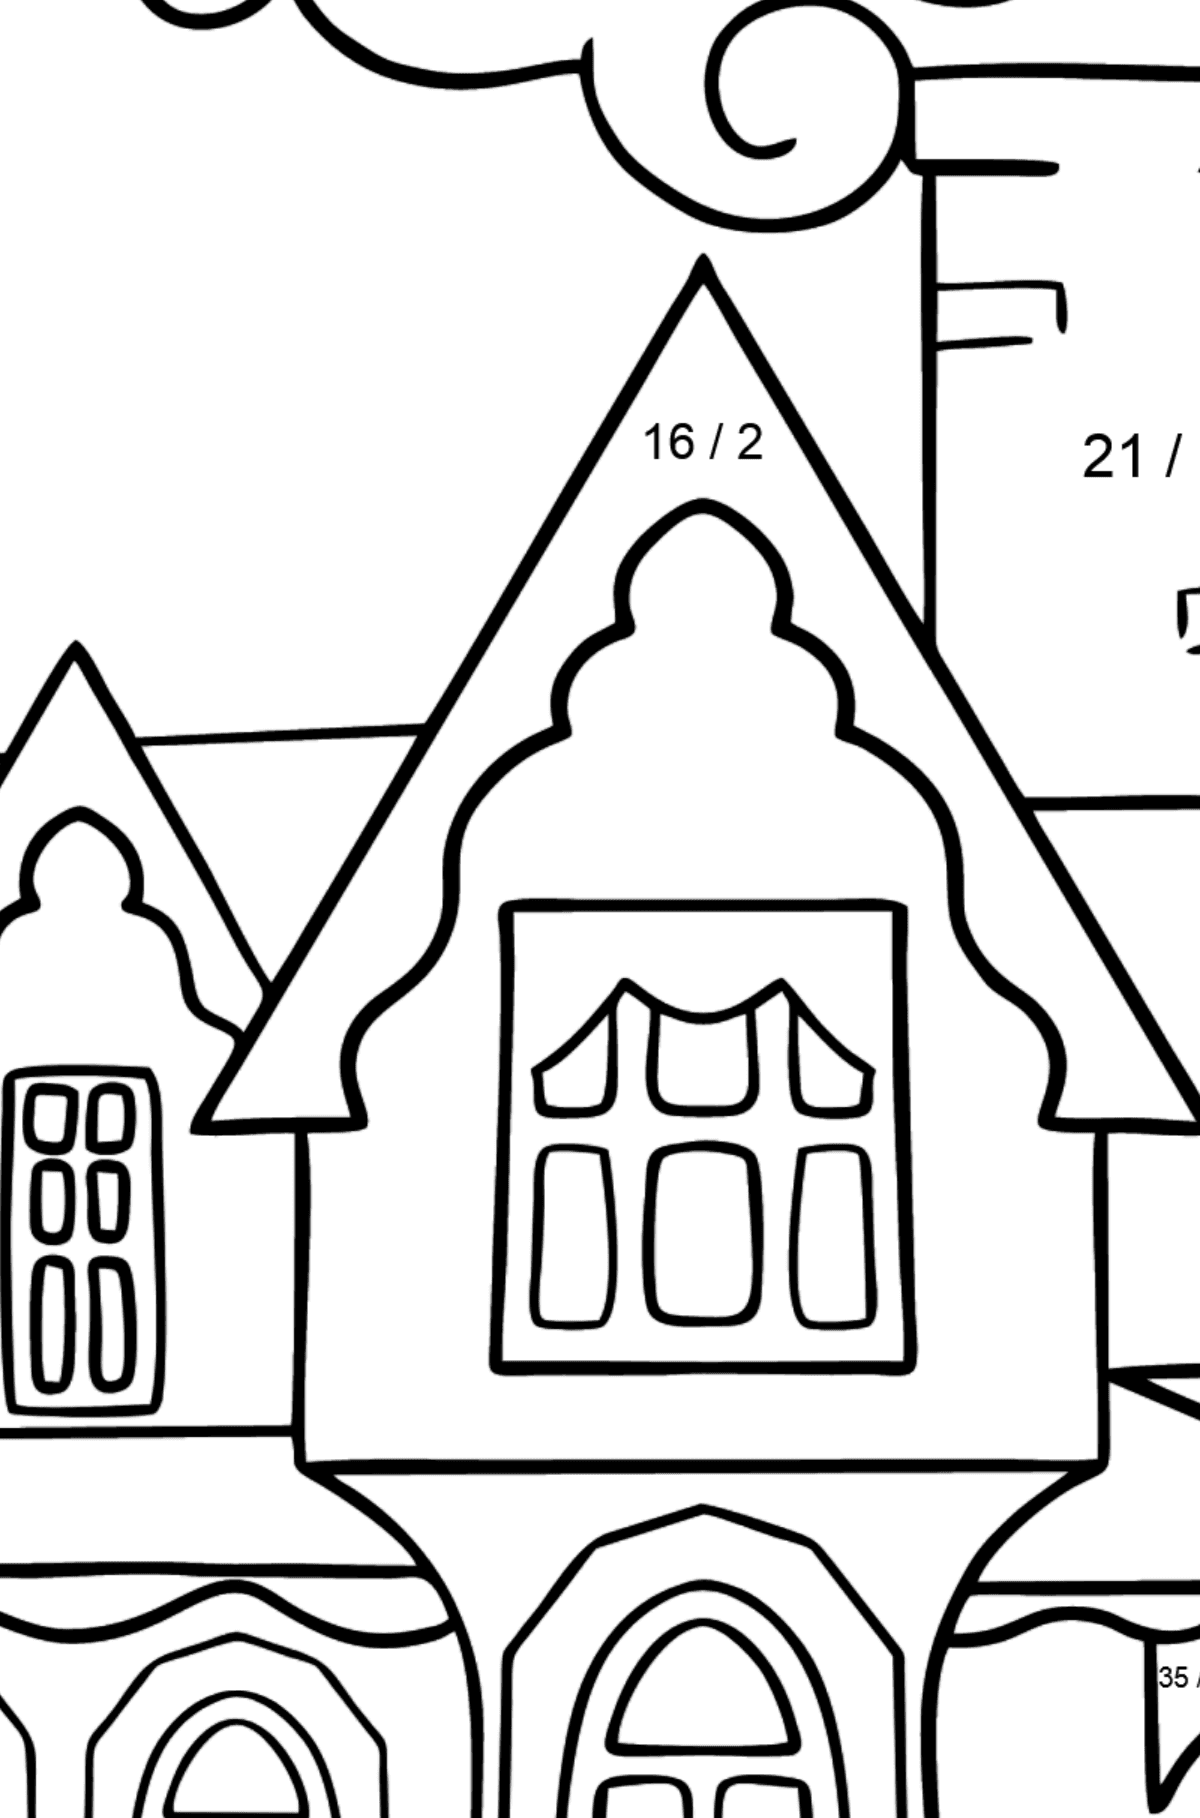 Simple Coloring Page - A Miraculous House - Math Coloring - Division for Kids